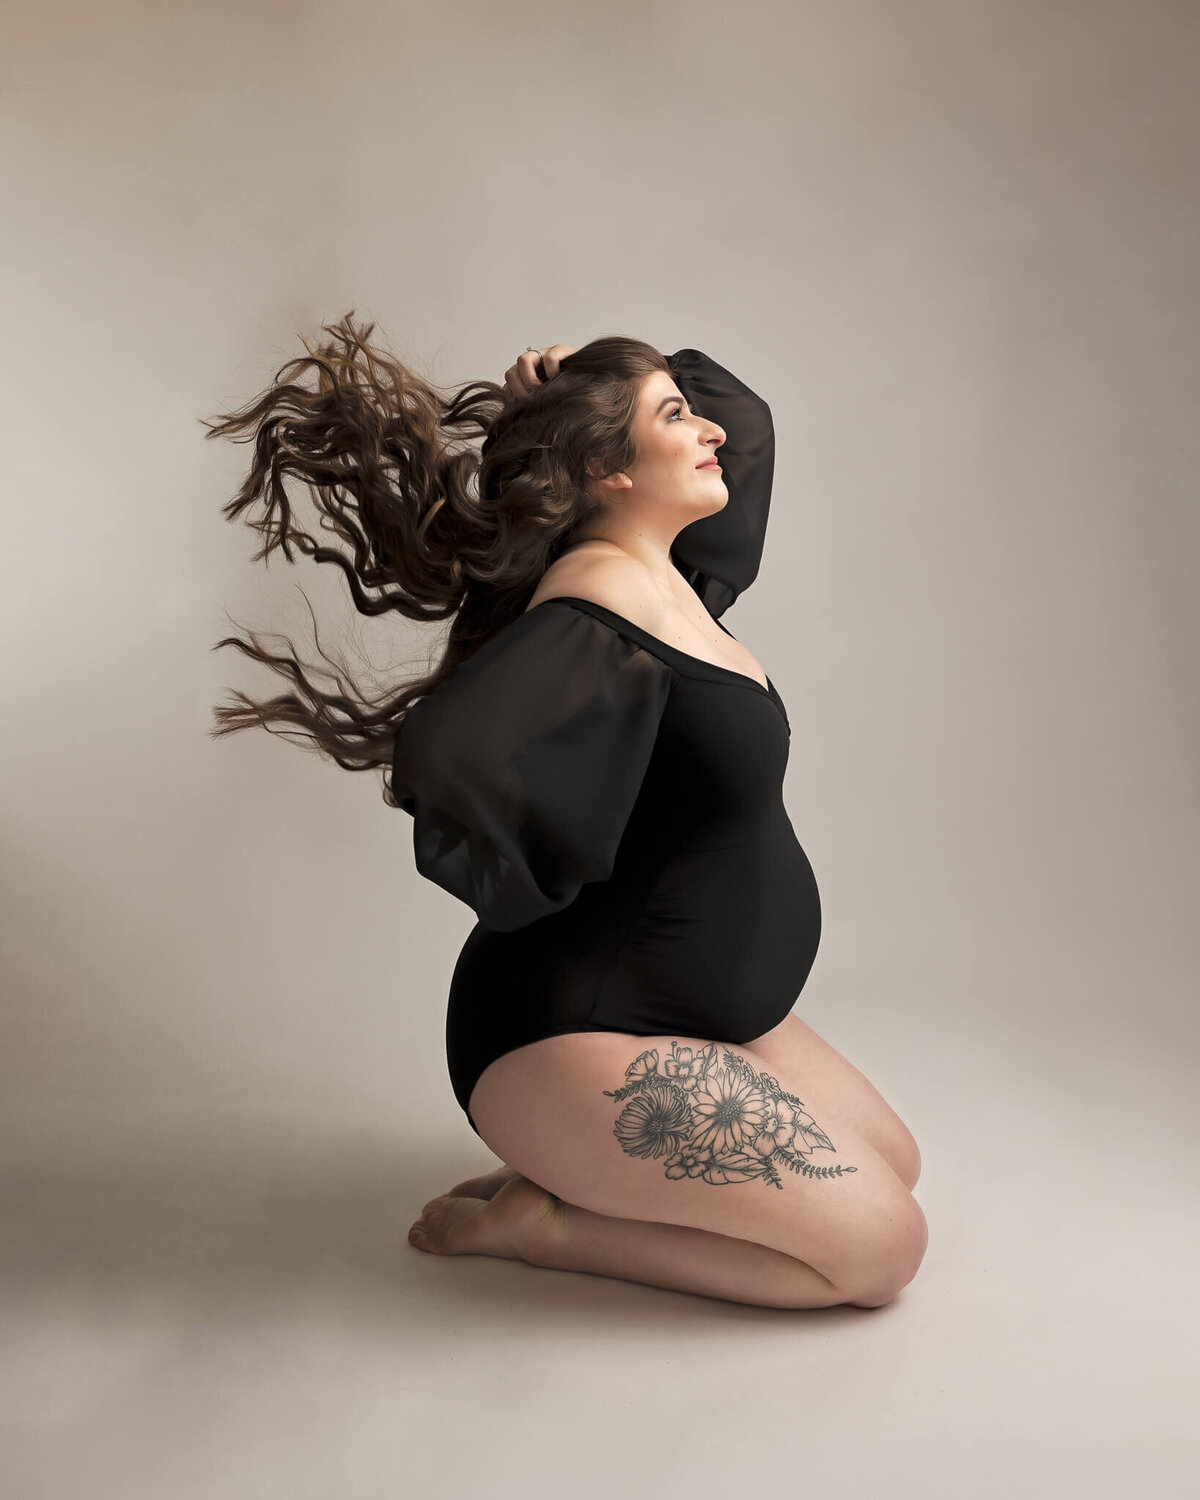 studio fine art Portland maternity photography of woman on knees throwing hair in studio maternity session